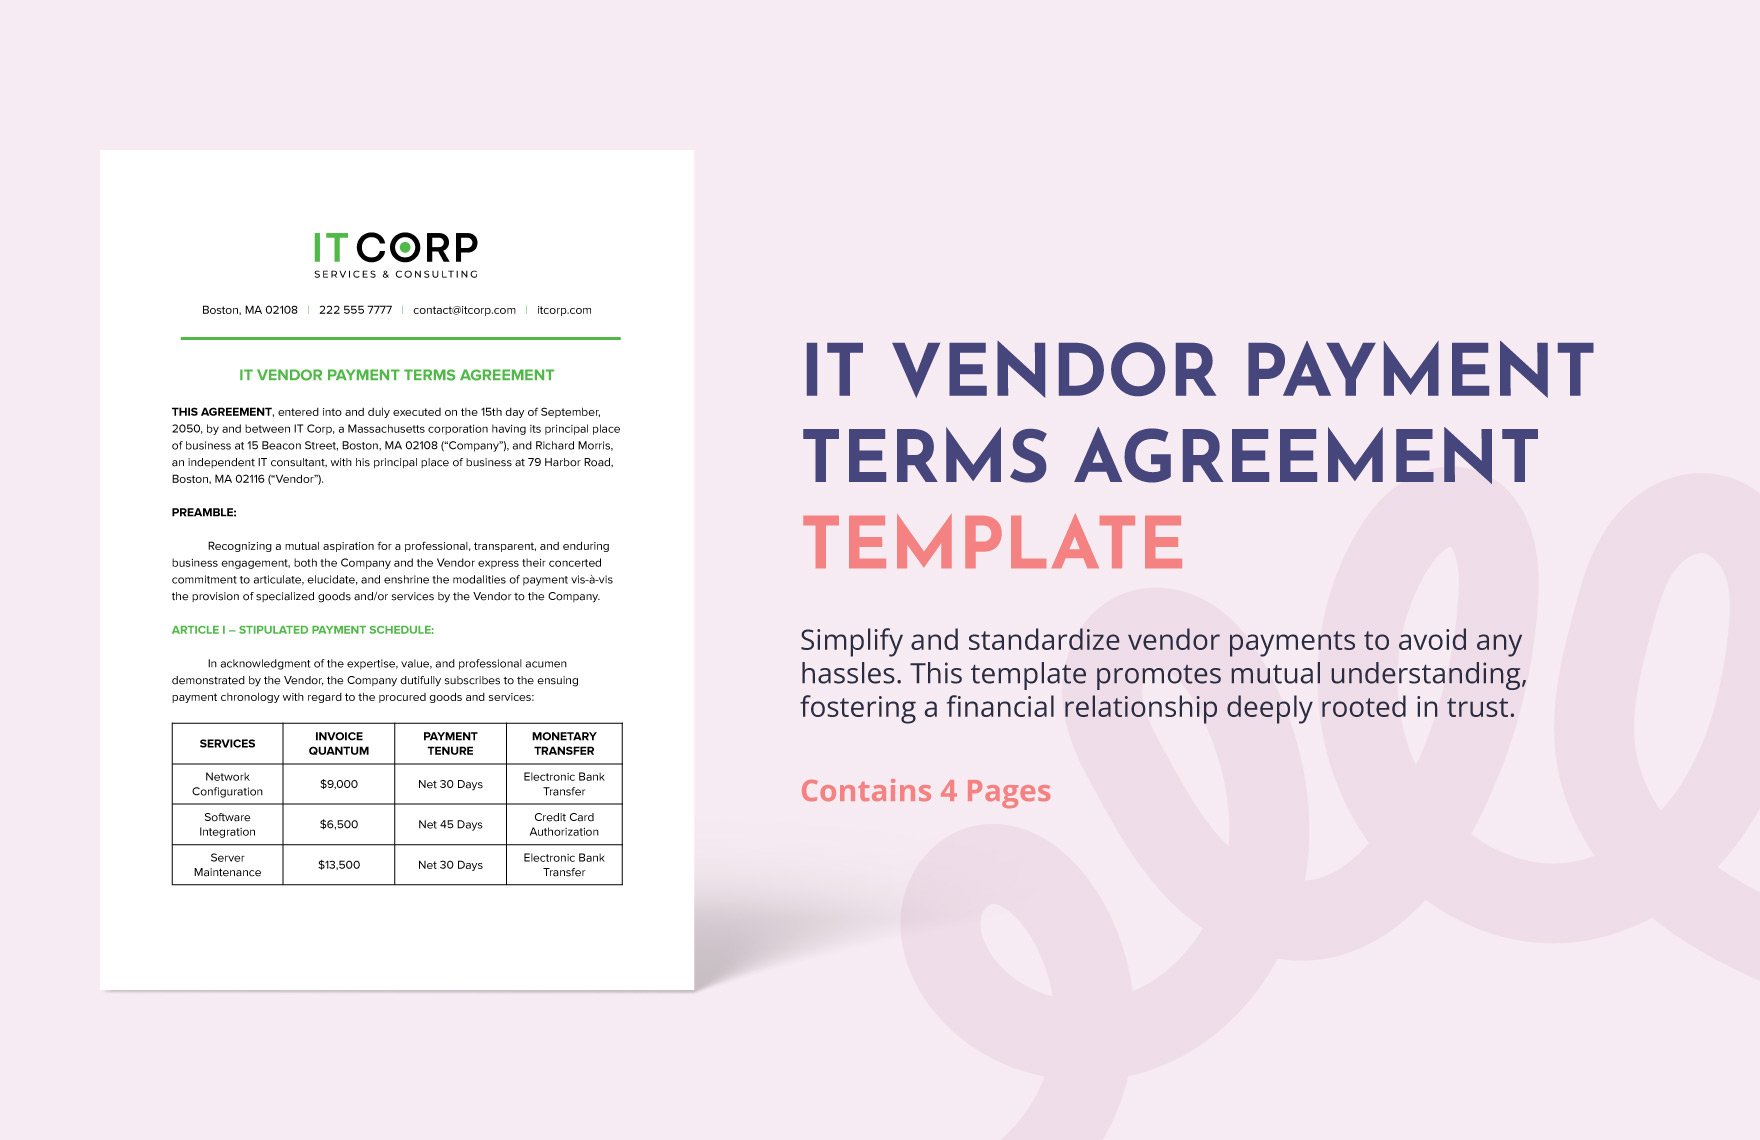 IT Vendor Payment Terms Agreement Template